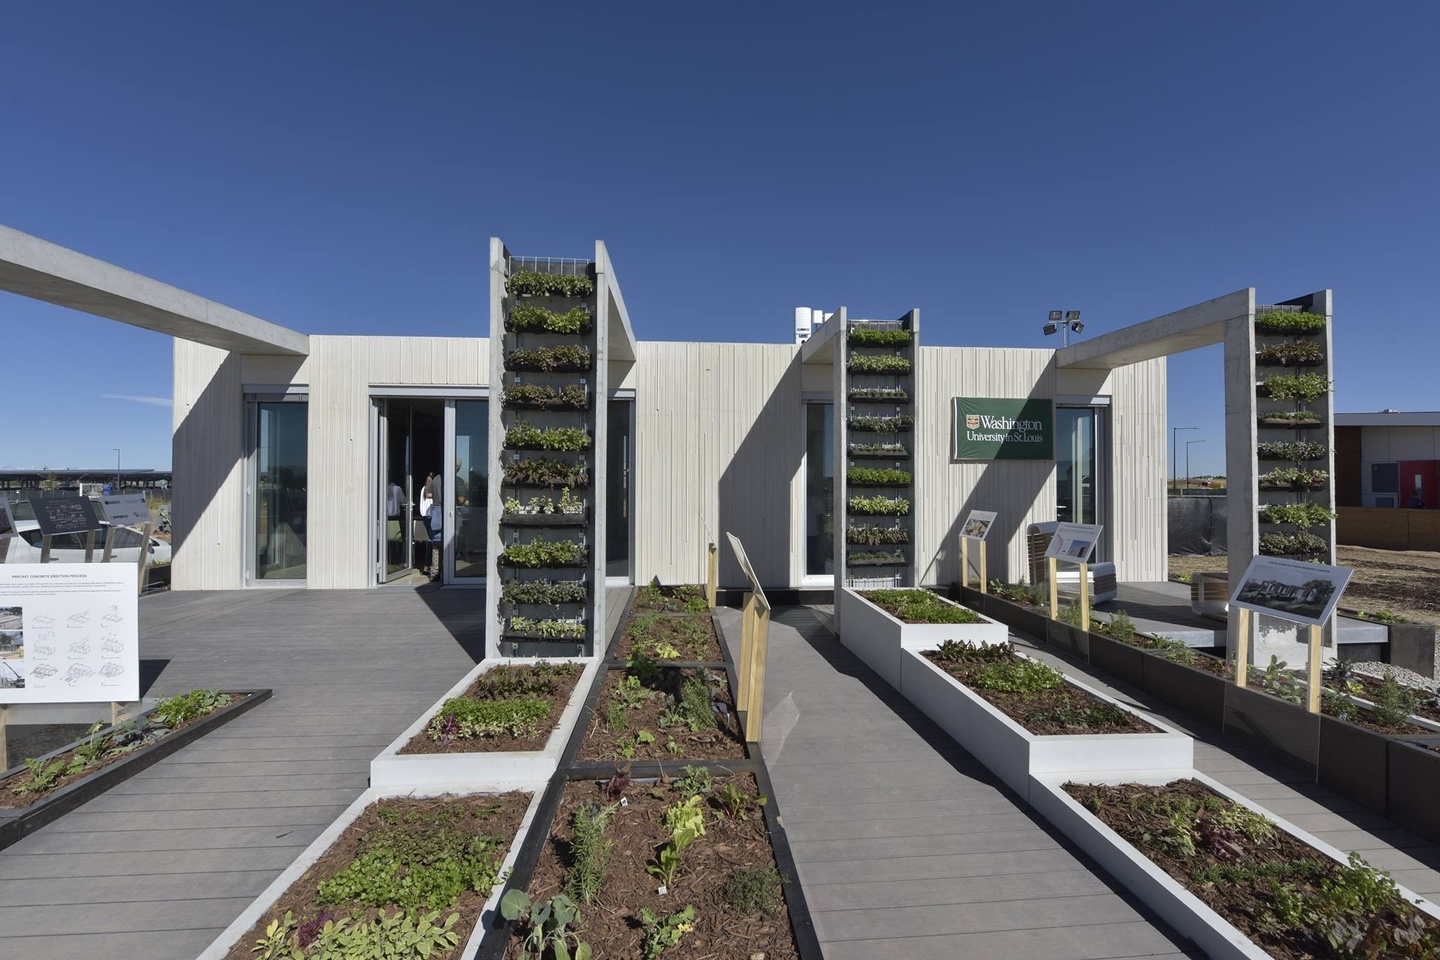 Boxy concrete single-story house with four projecting buttresses that serve as vertical gardens. The house is set on a very large deck filled with rows of garden boxes.